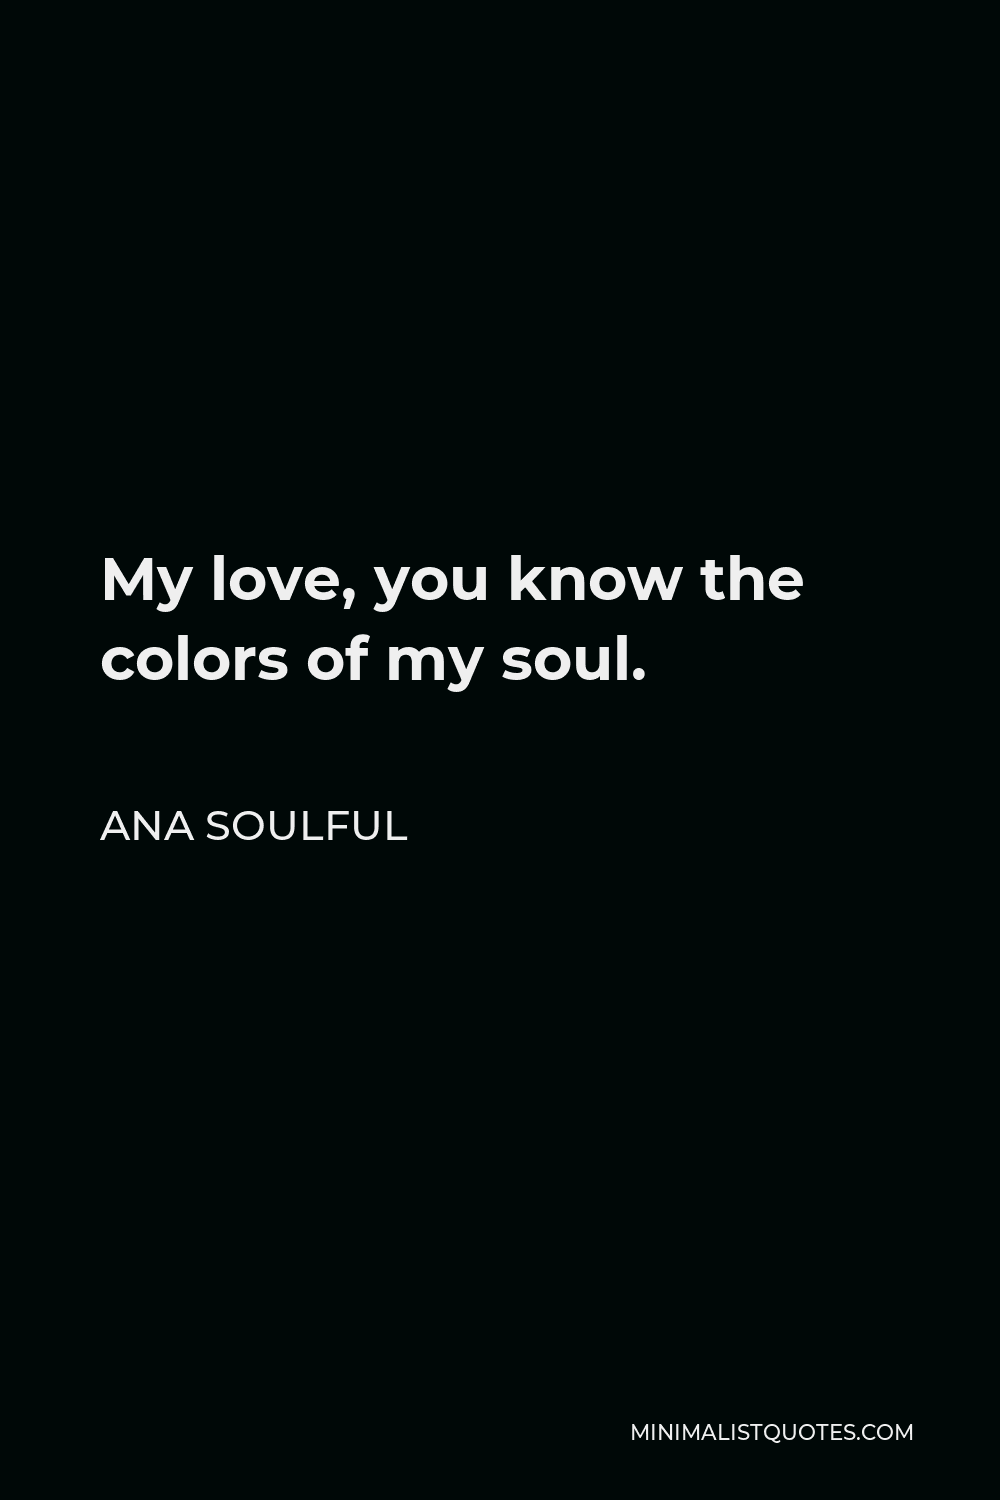 Ana Soulful Quote - My love, you know the colors of my soul.